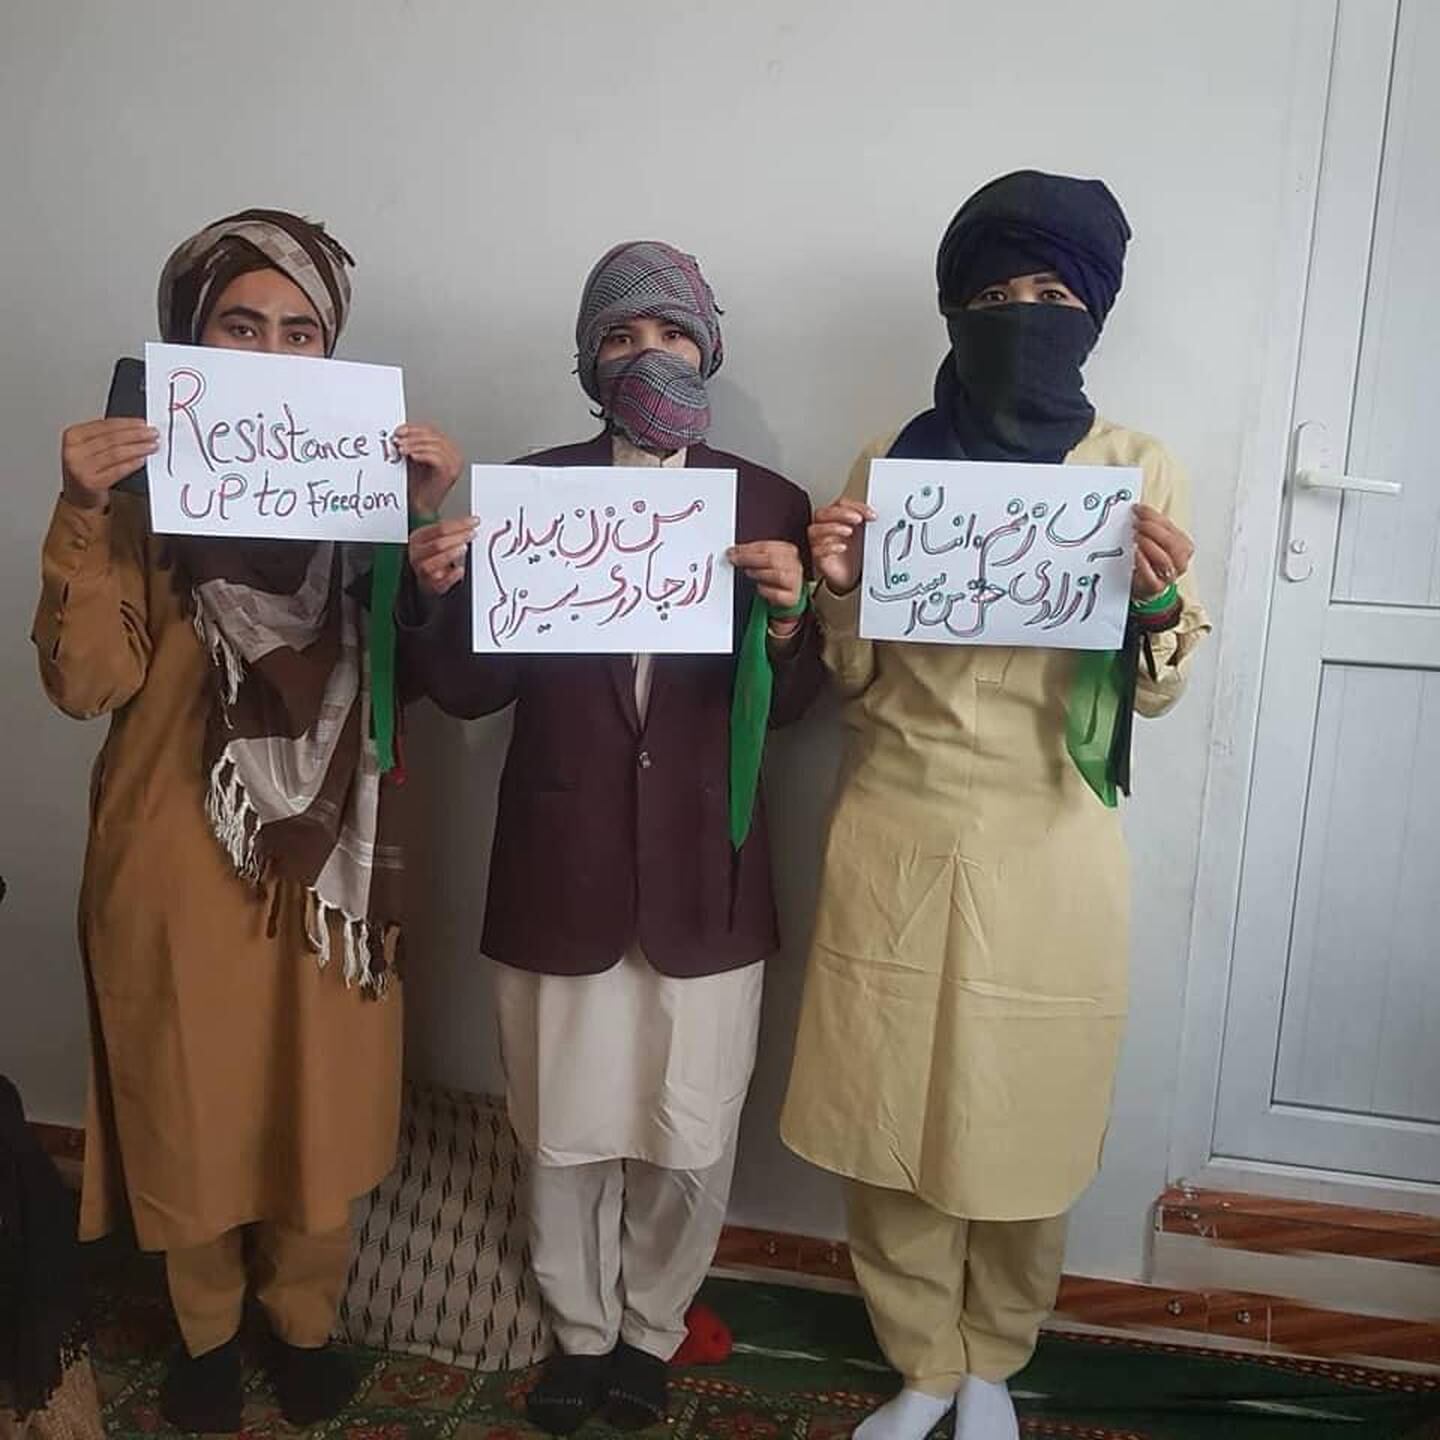 Afghan women pose for a photo in men's clothing in a form of protest started by Rabia Balkhi to oppose restrictions imposed on women by Afghanistan's Taliban rulers.